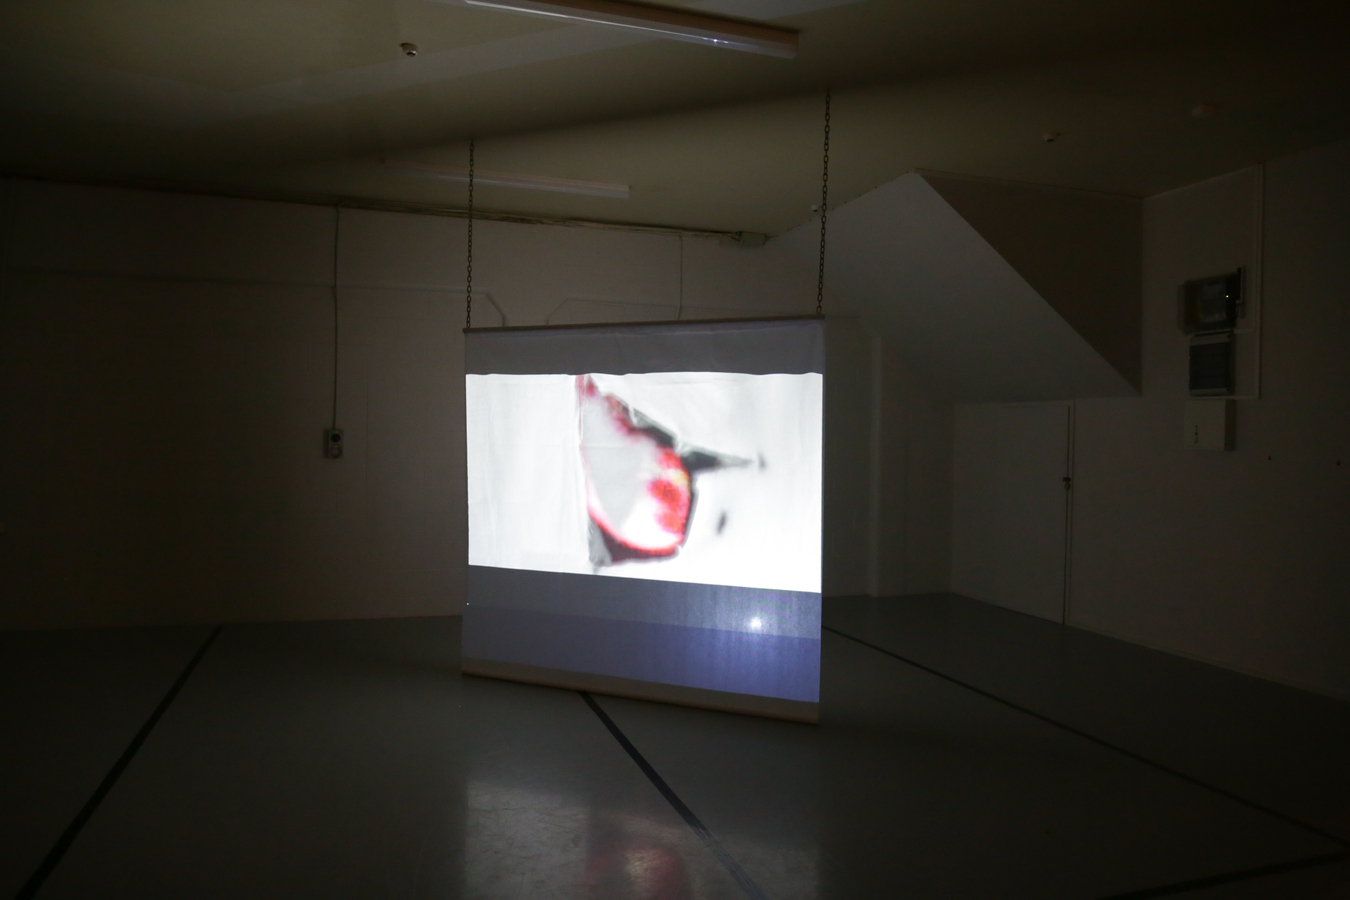 Image: Min-Young Her, ㅁ: each mouthful a comma or period (installation view), 2023. Photo by Amy Weng.